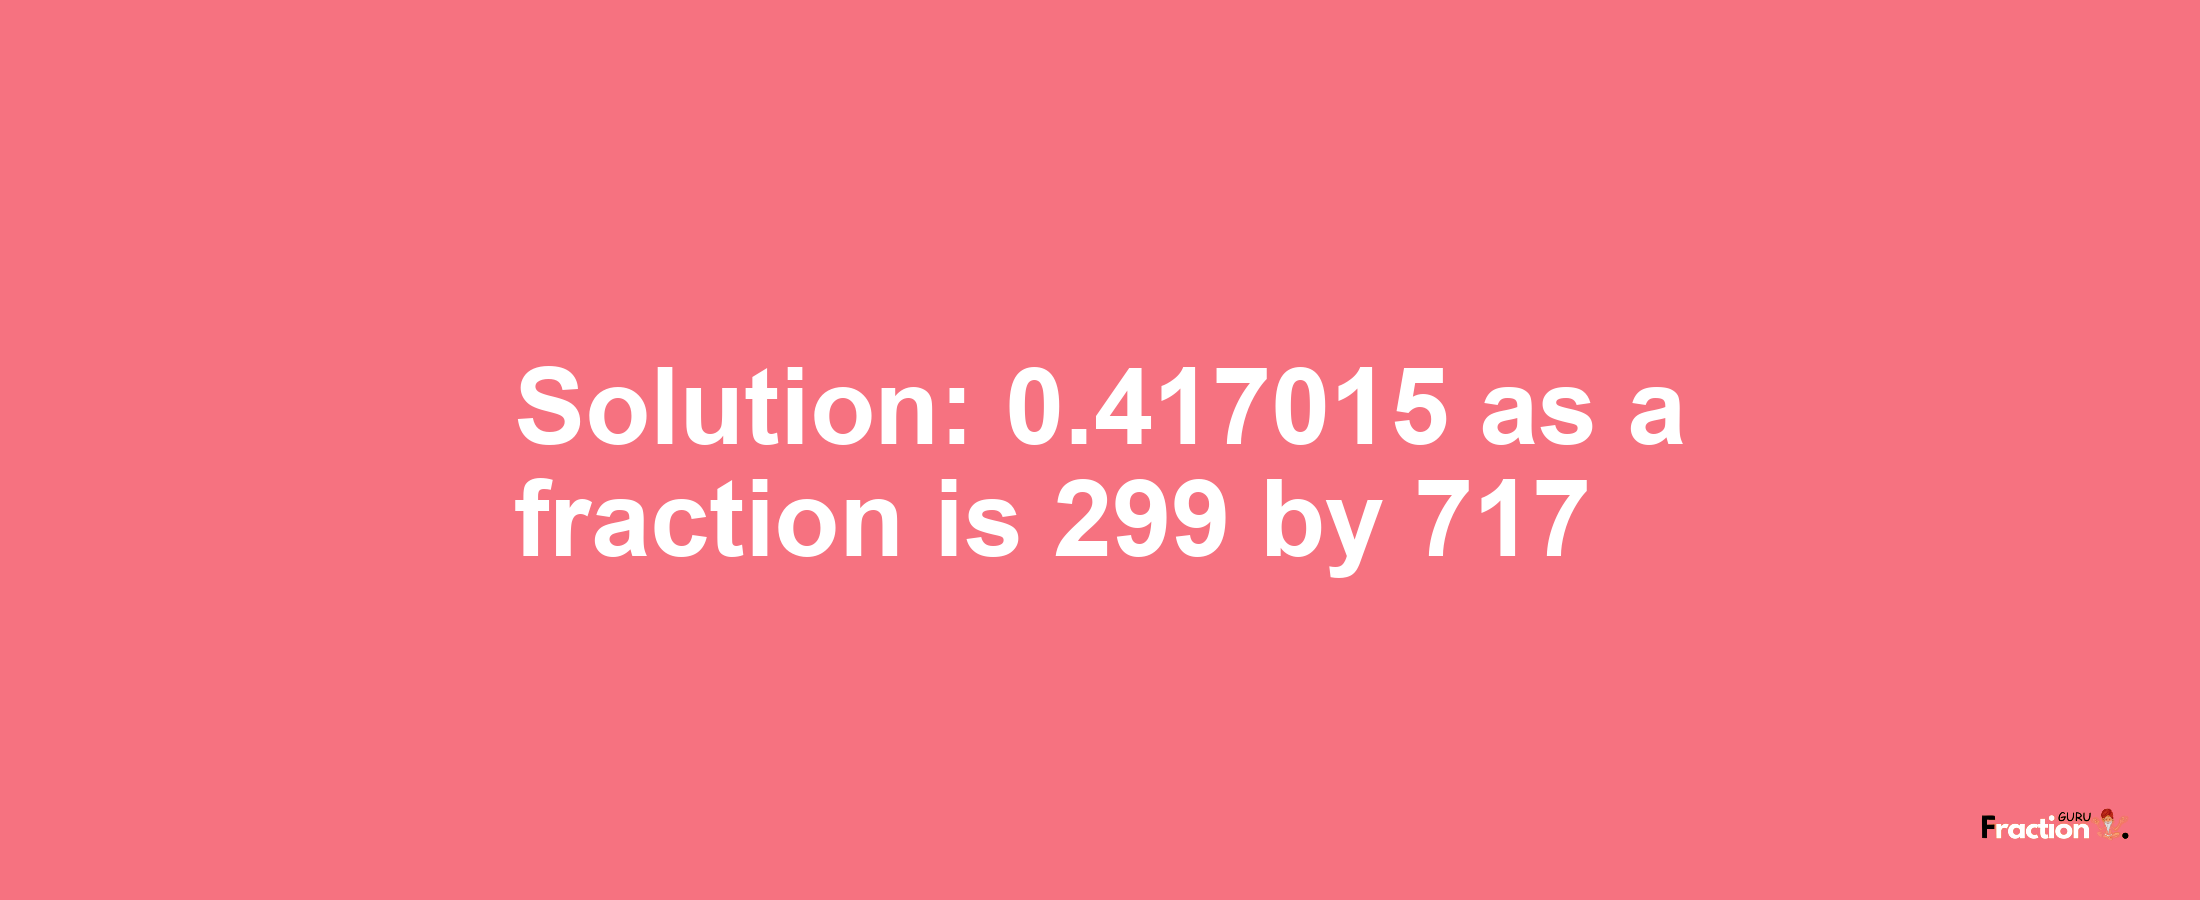 Solution:0.417015 as a fraction is 299/717